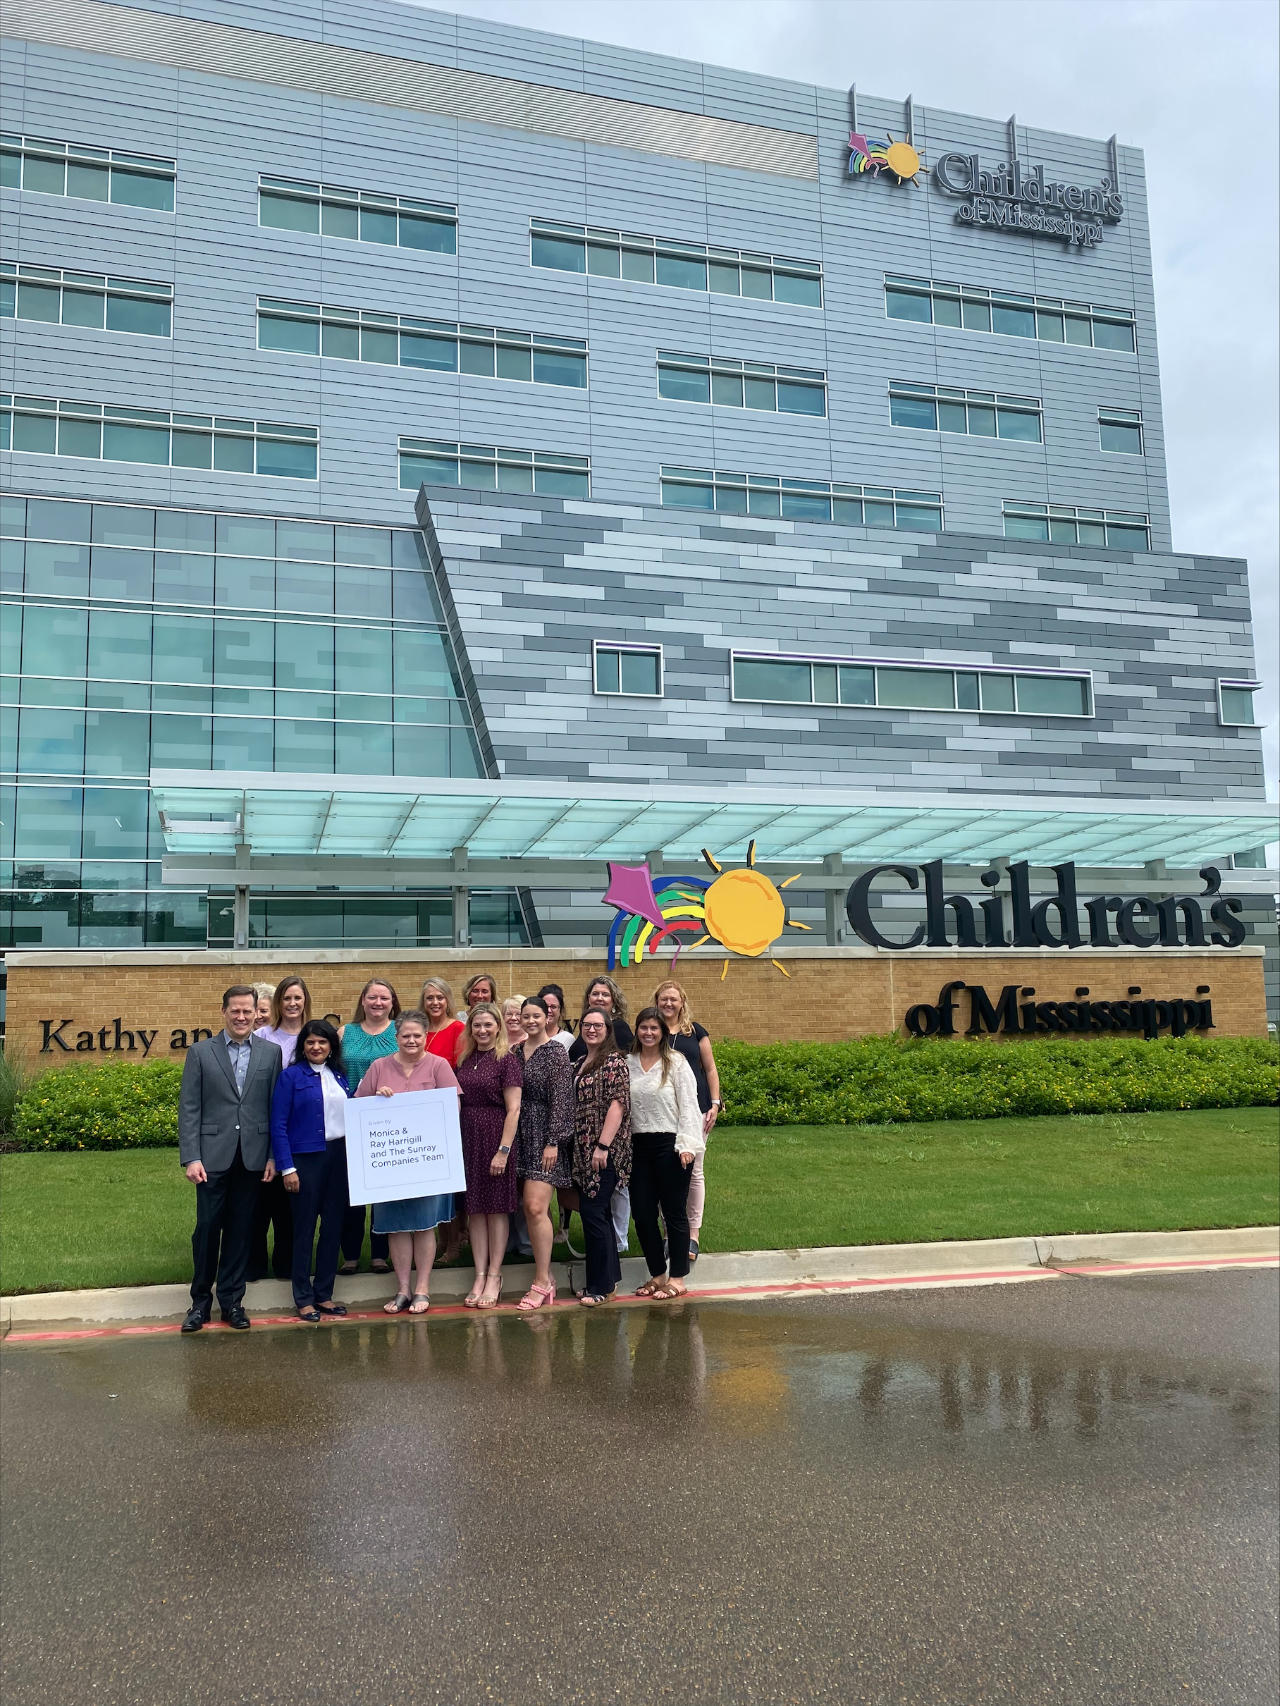 Donations given by Monica & Ray Harrigill and The Sunray Companies Team sponsor 2 NICU rooms at Children’s of Mississippi hospital